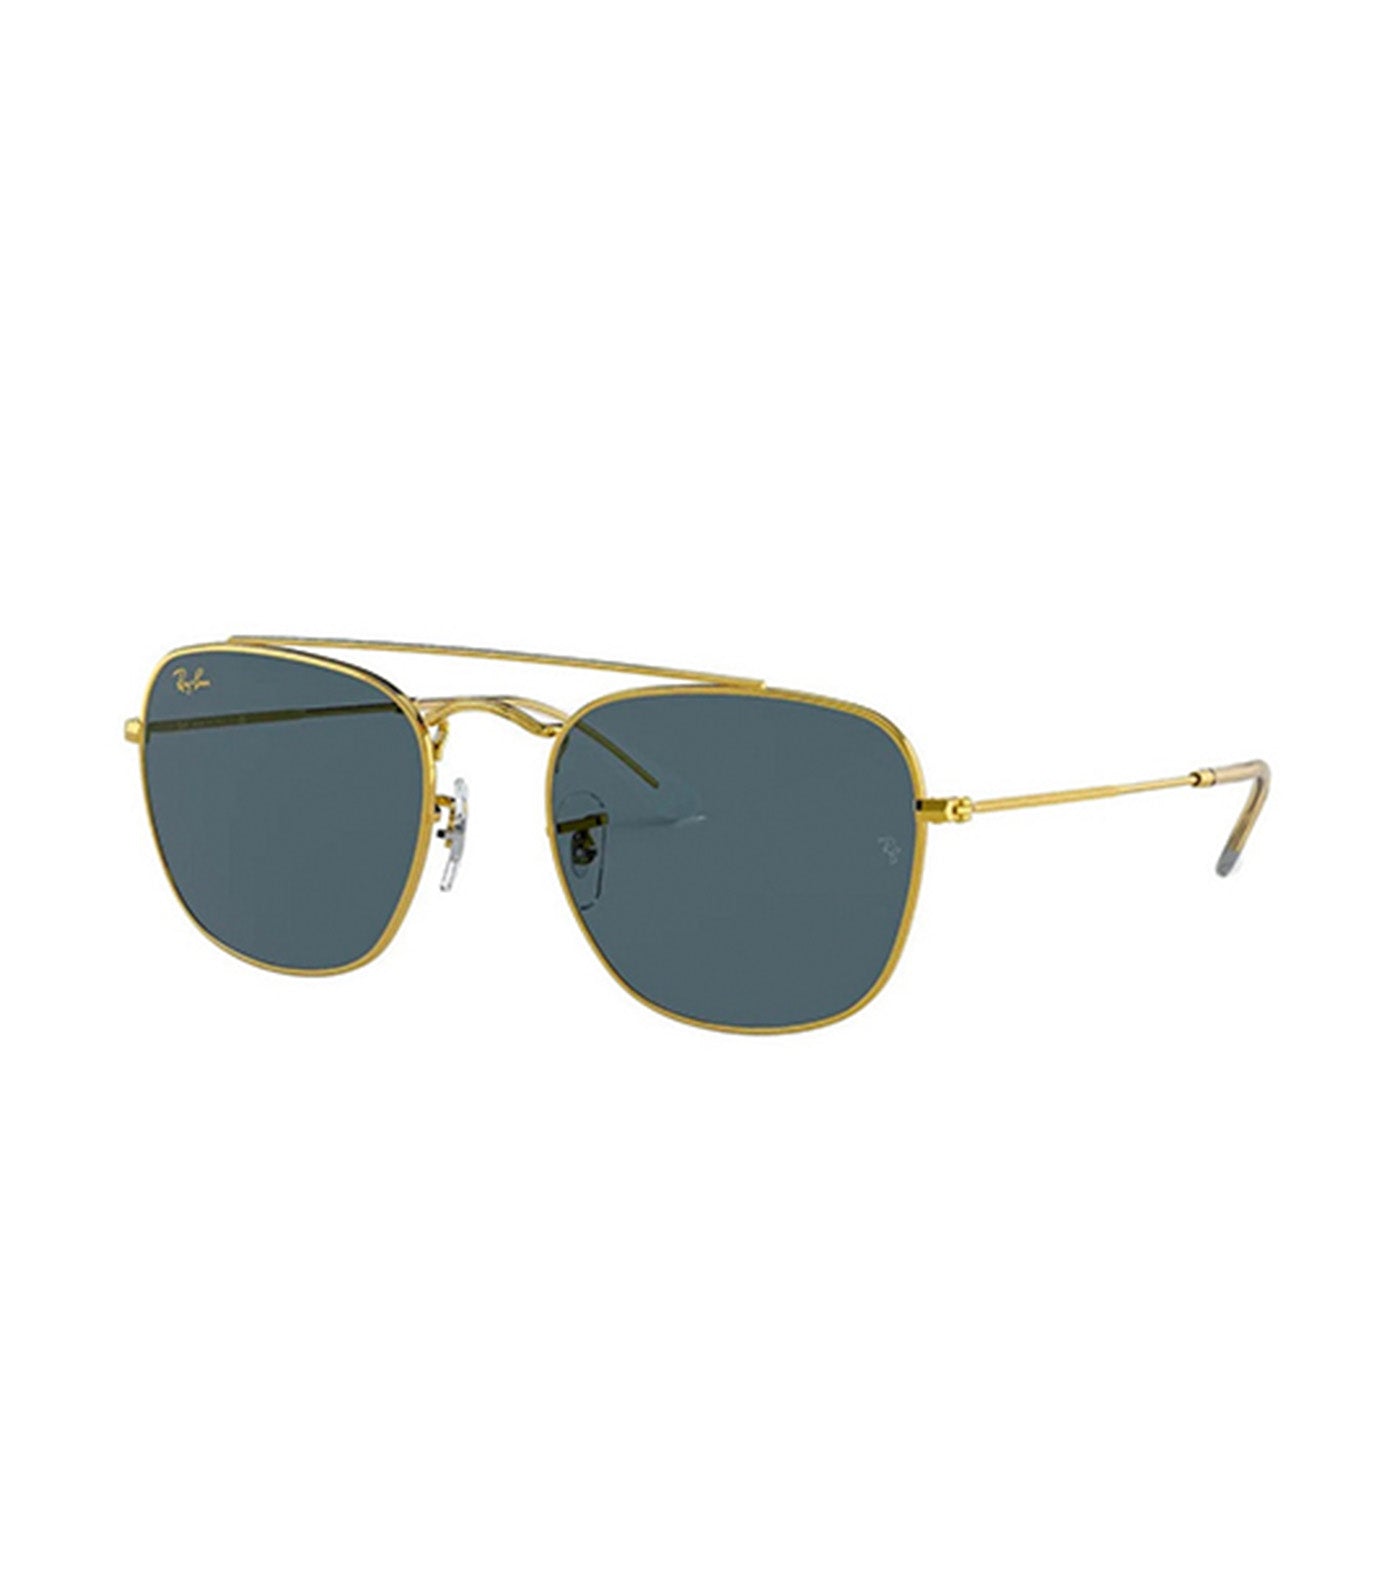 RB3557 Sunglasses Gold and Dark Blue